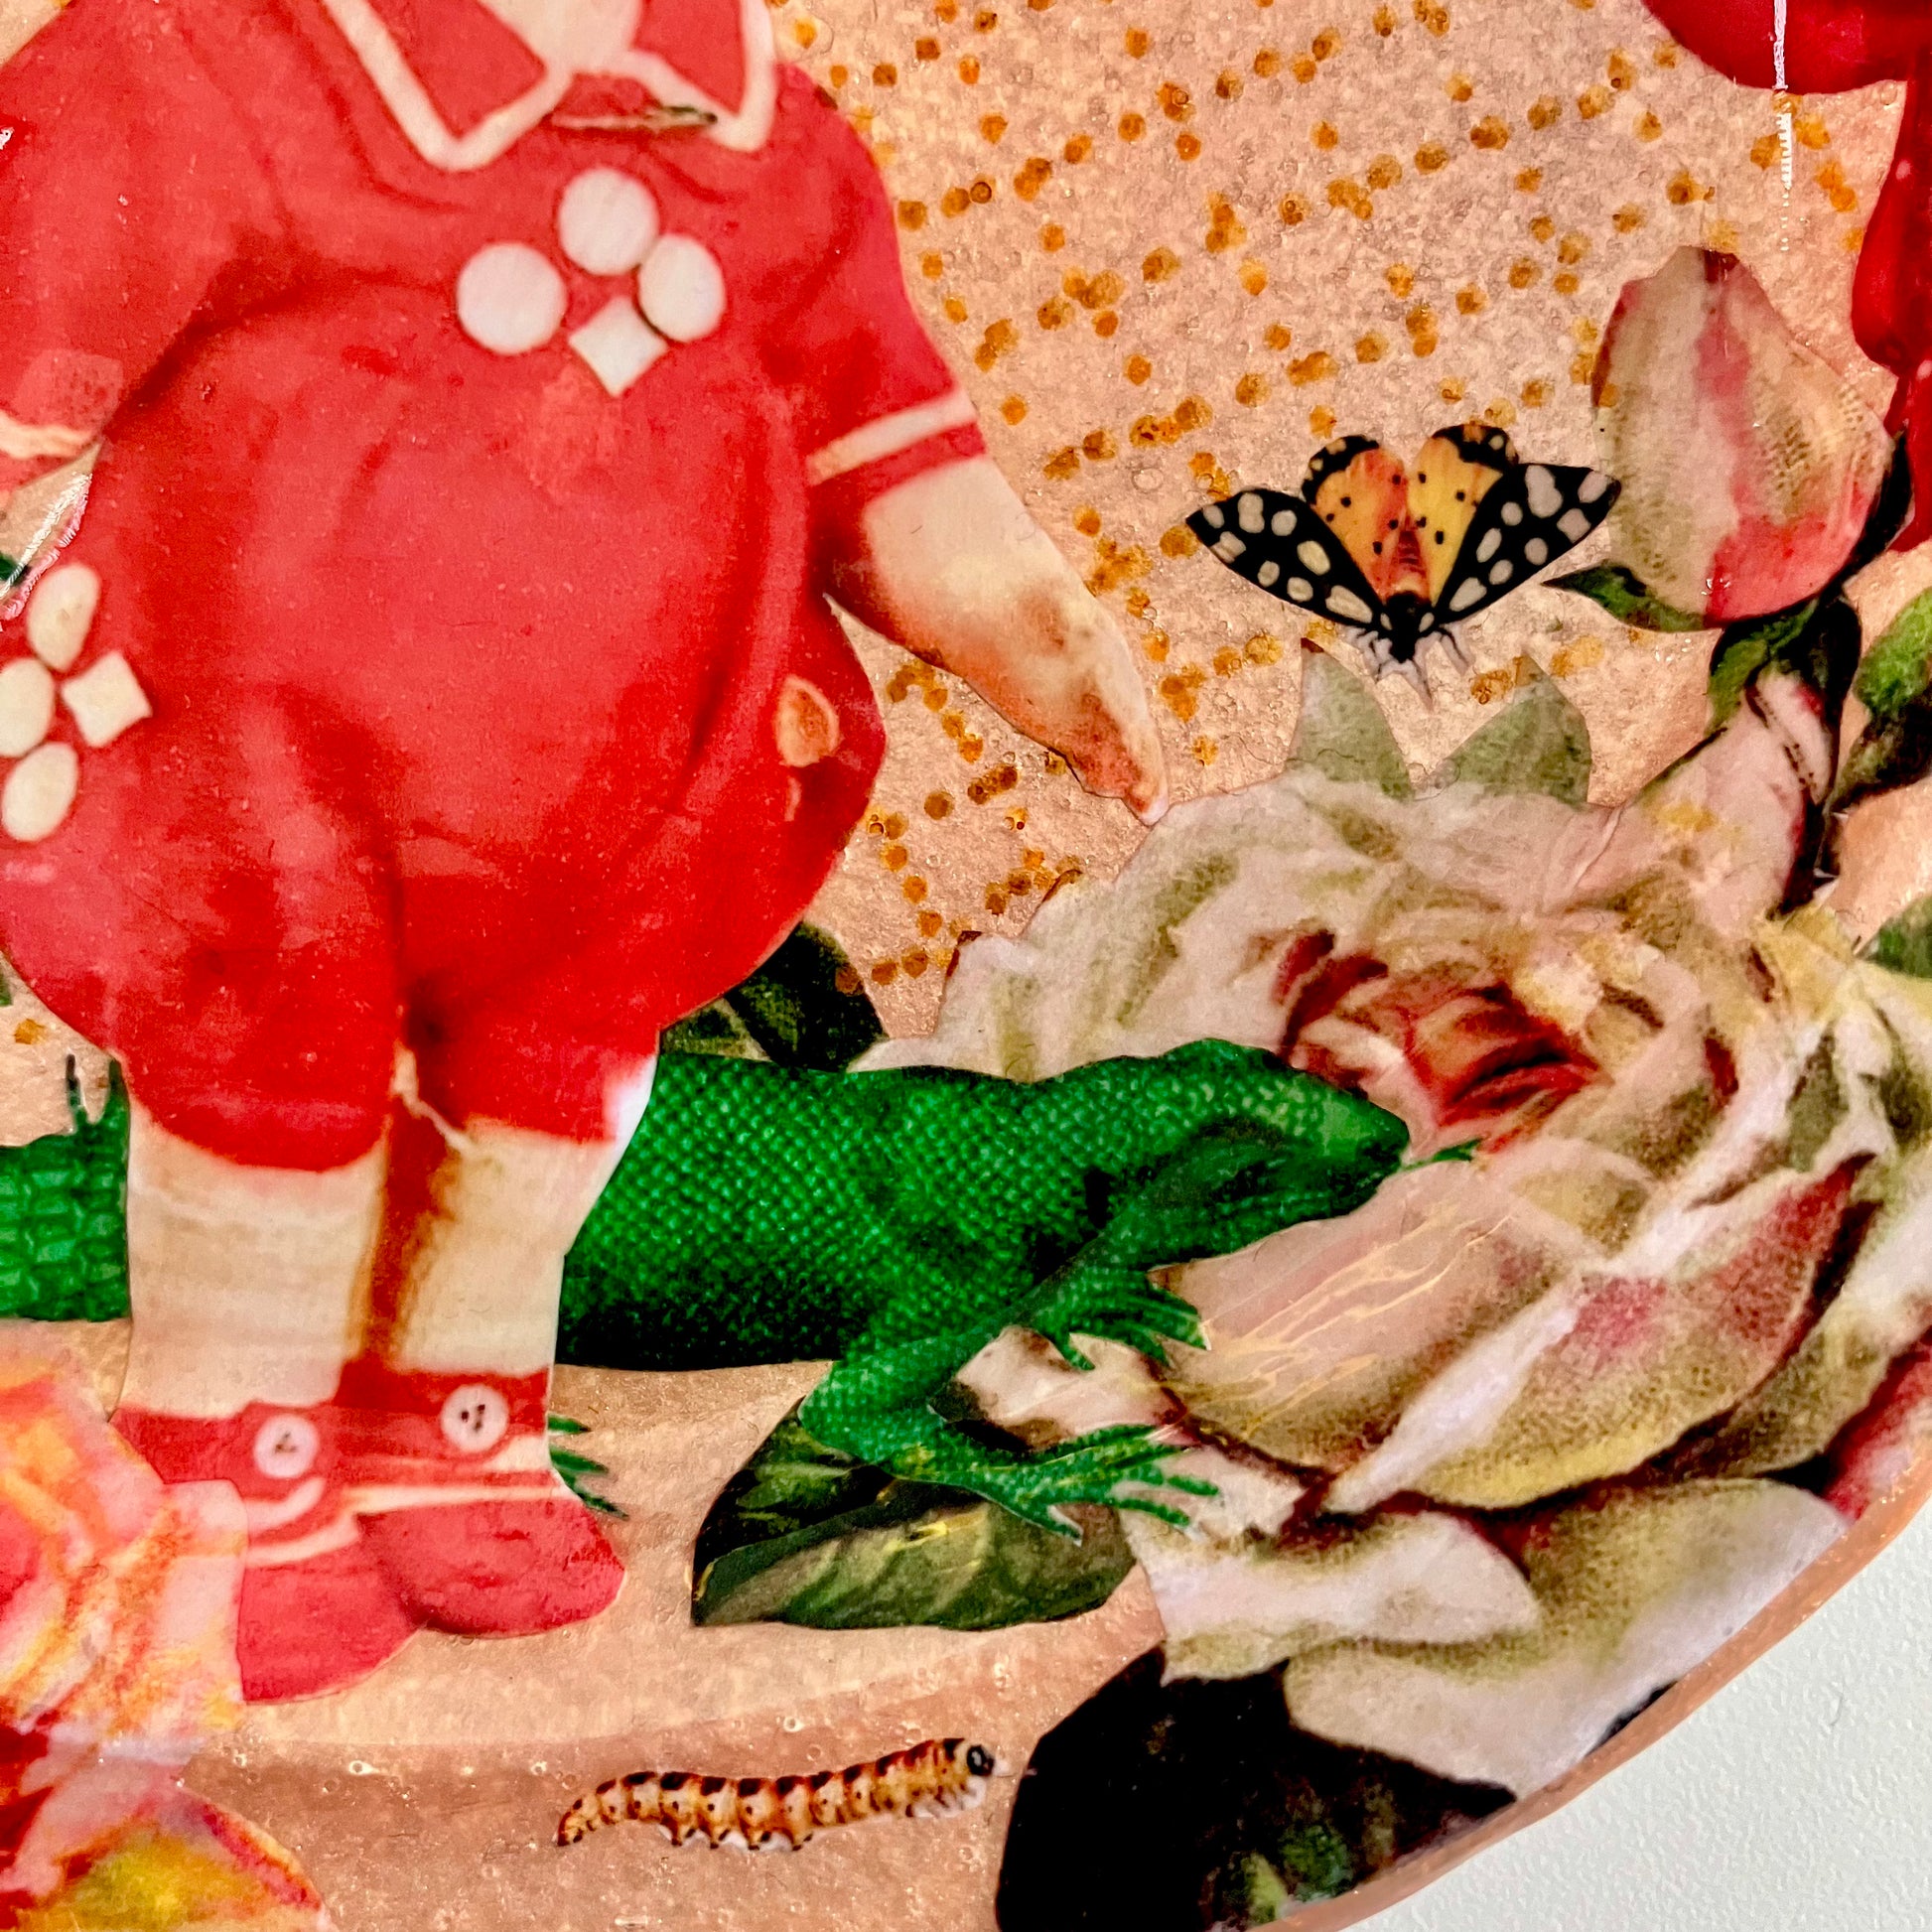 Chaos, Bliss, and Sweet Ecstasy Wall Plate by House of Frisson, closeup detail of the collage showing a vintage doll, a lizard, a moth, and roses, on a blush coloured background.